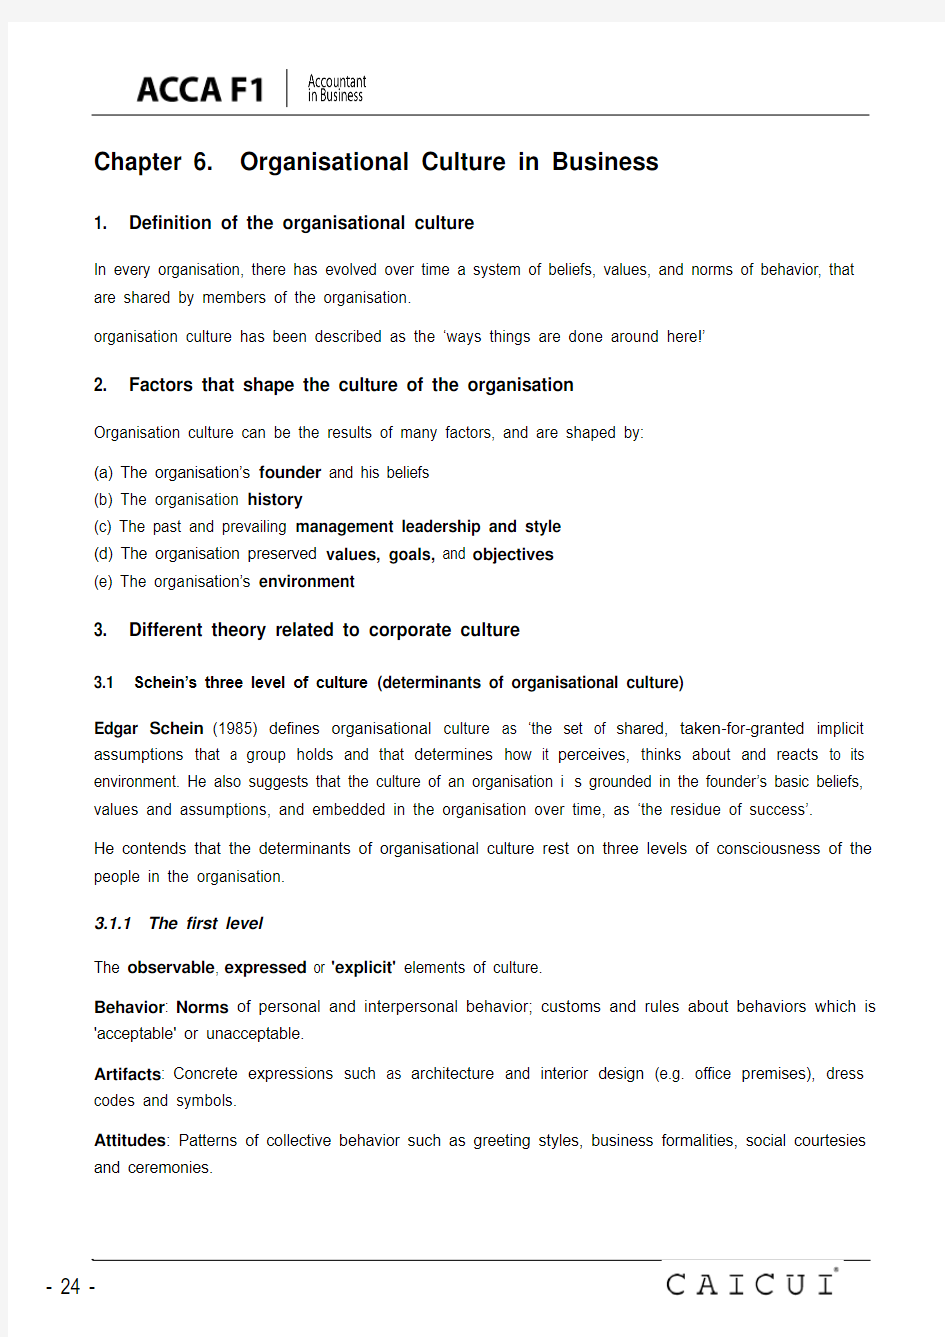 02-ACCA-F1-讲义-基础-PART A-Chapter 6 Organisational Culture in Business-1